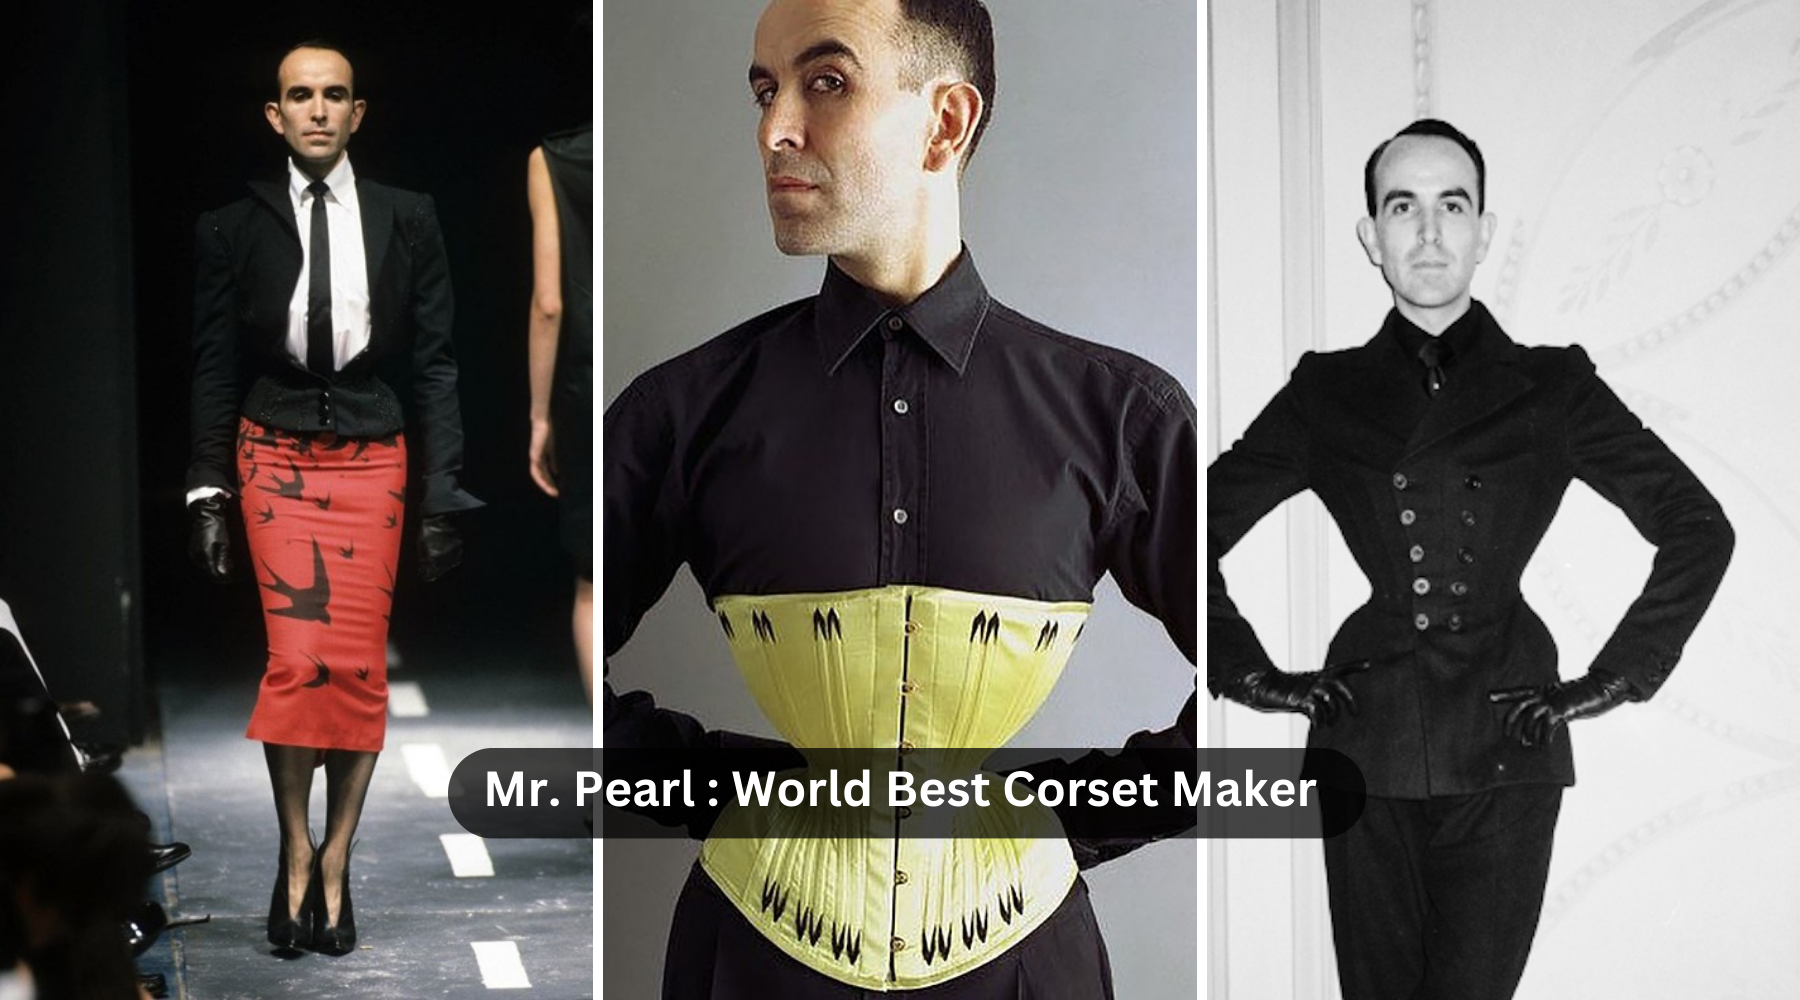 Celebrity Corset Maker Mr Pearl - The Man Who Designs & Wears Corsets